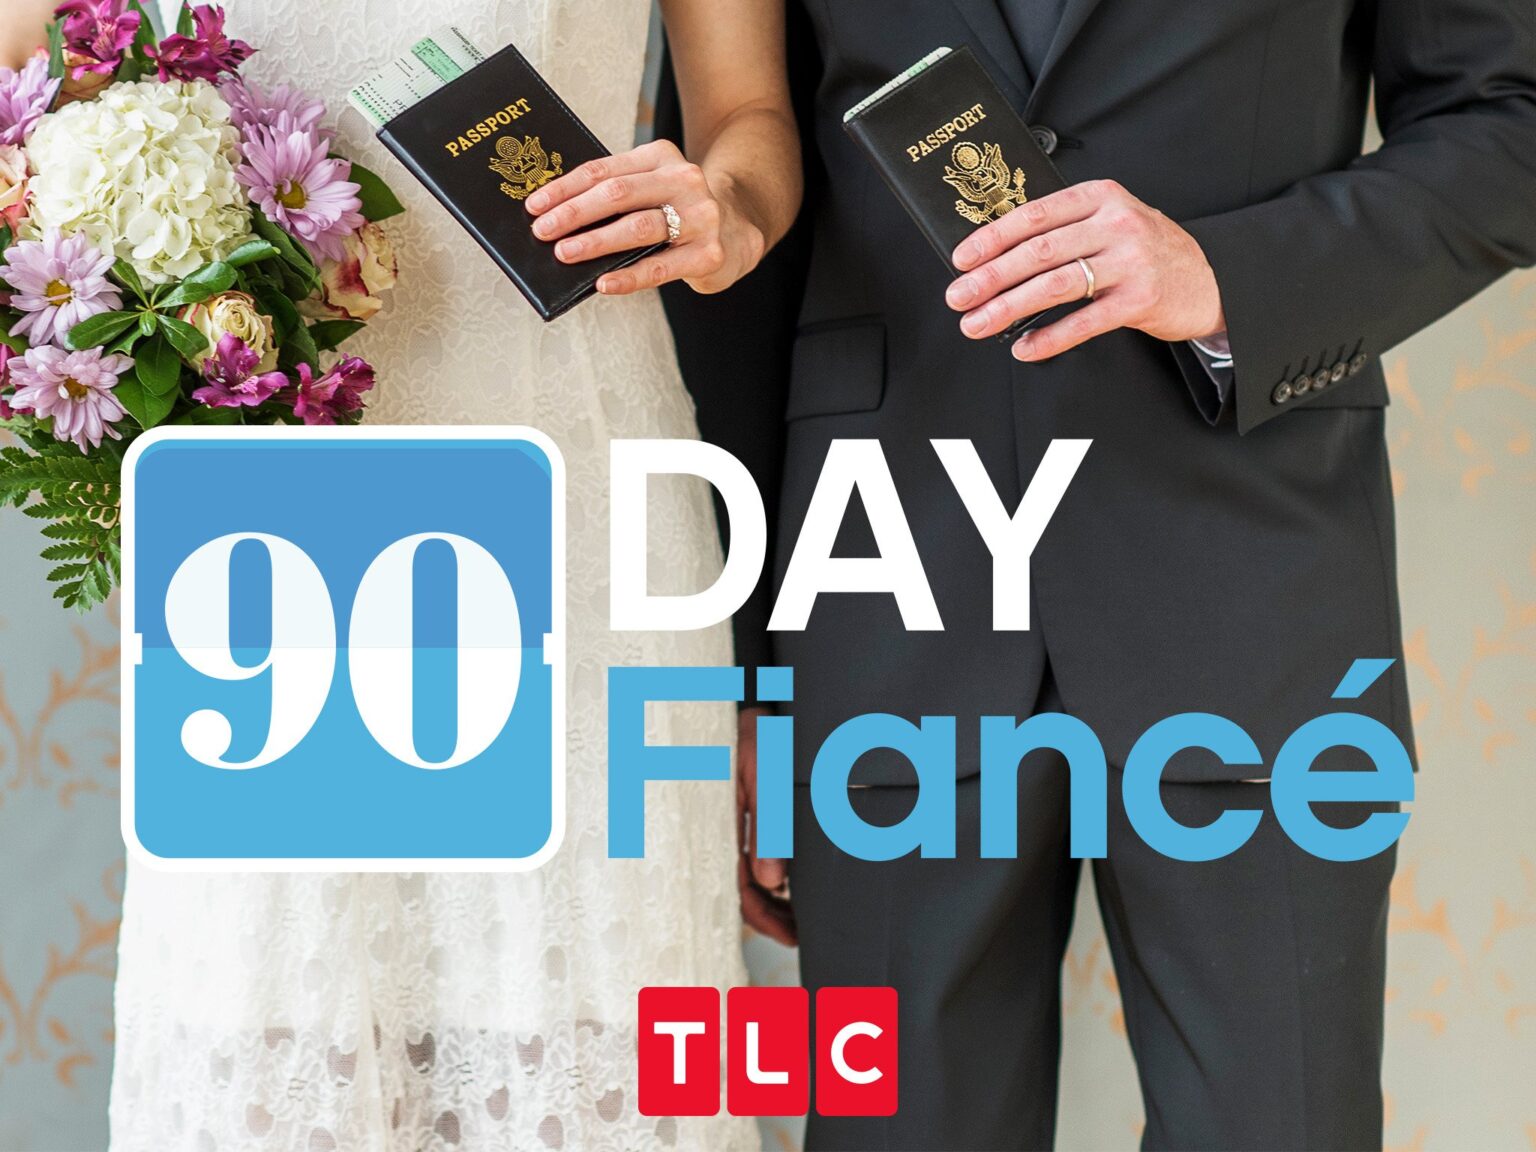 '90 Day Fiance' is a wildly popular reality television show on the TLC network. Here are the most popular couples from the show.